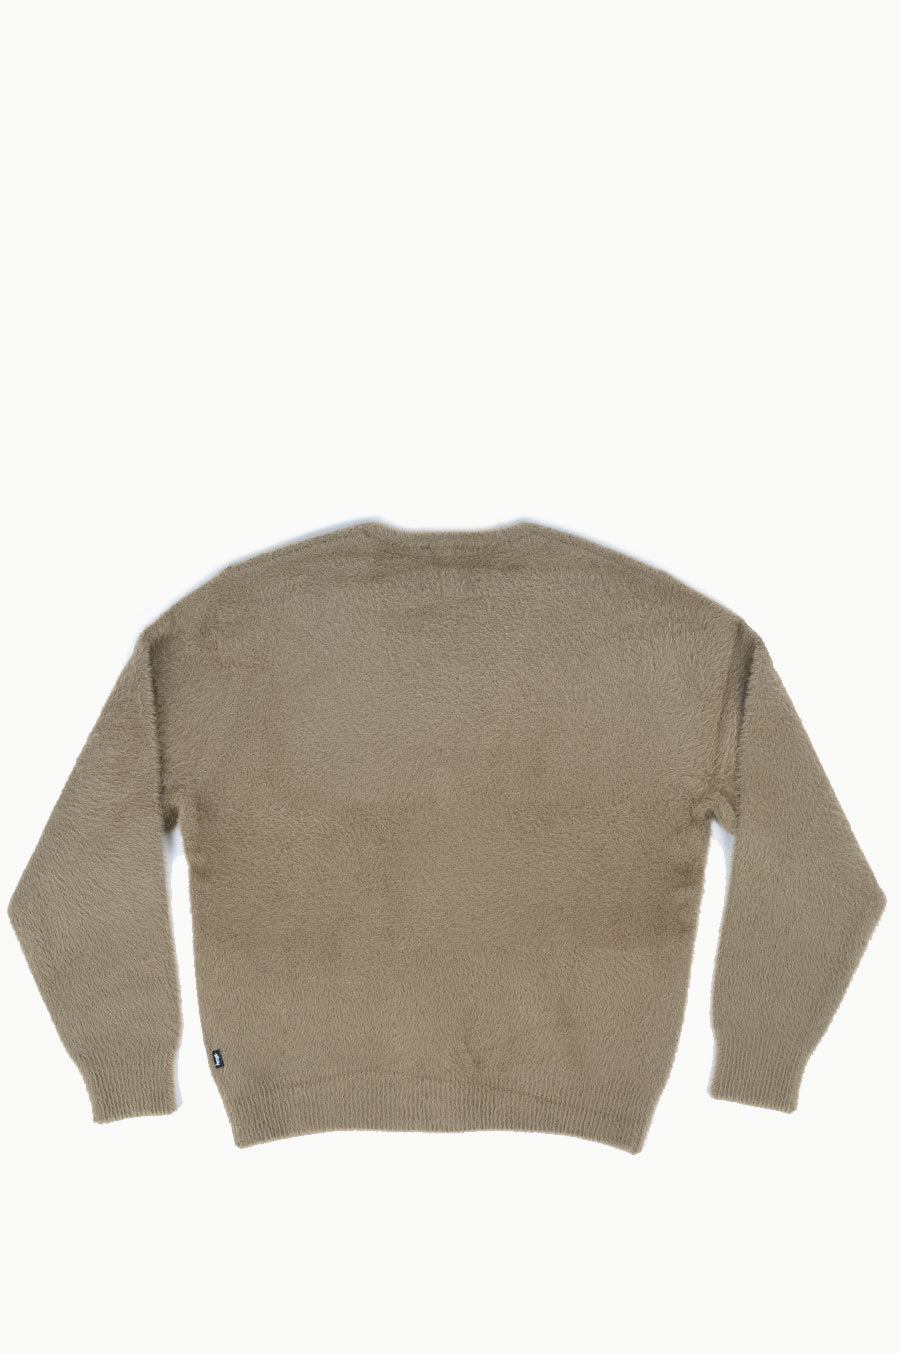 STUSSY SHAGGY CARDIGAN TAUPE – BLENDS